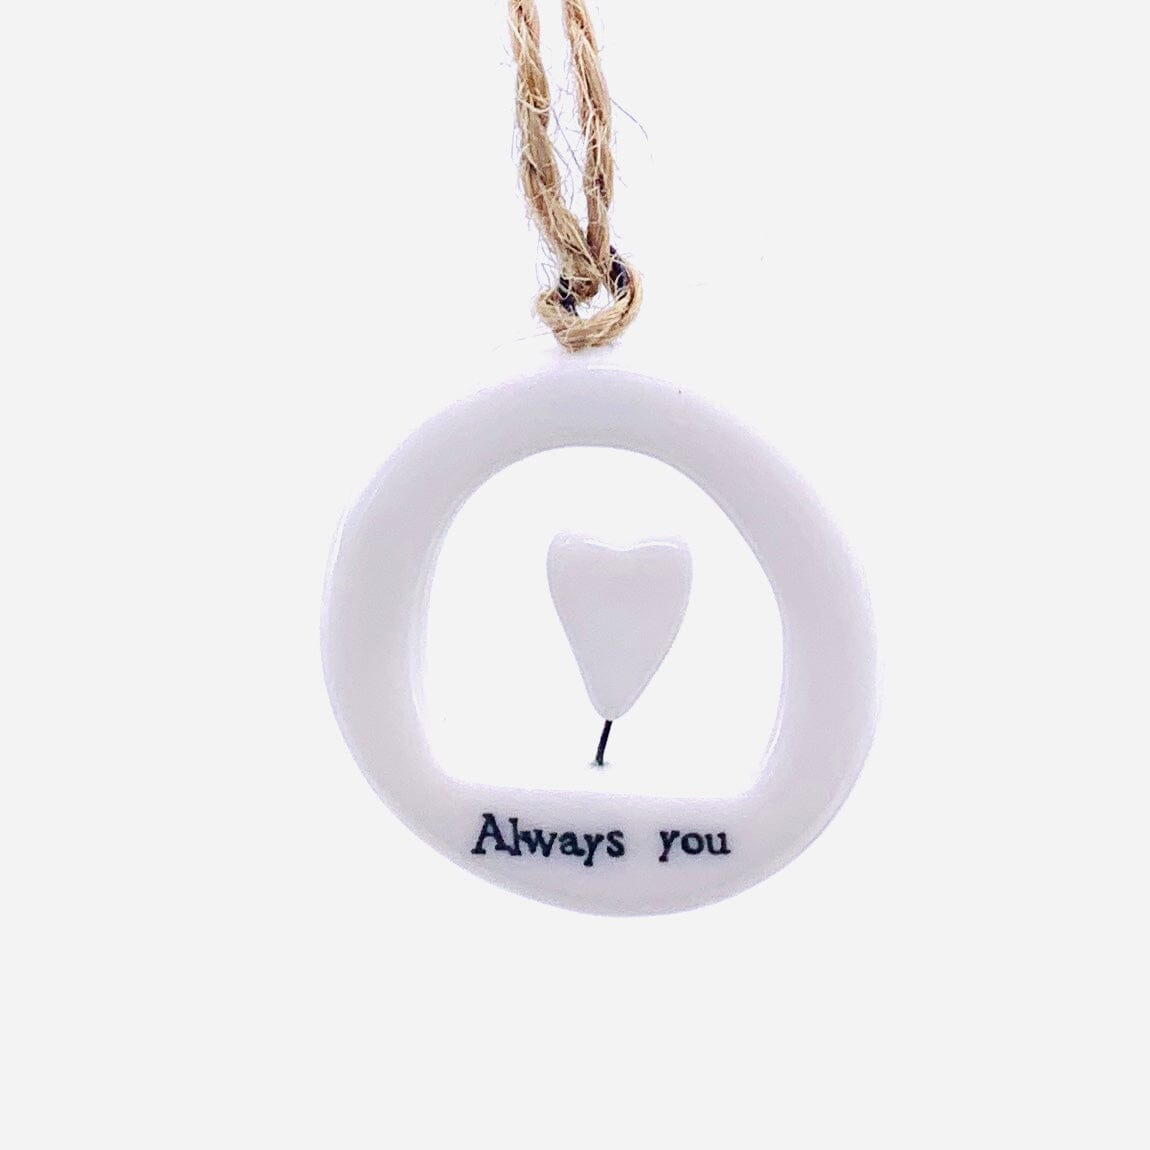 Porcelain Ornament, Always You Ornament Two's Company 